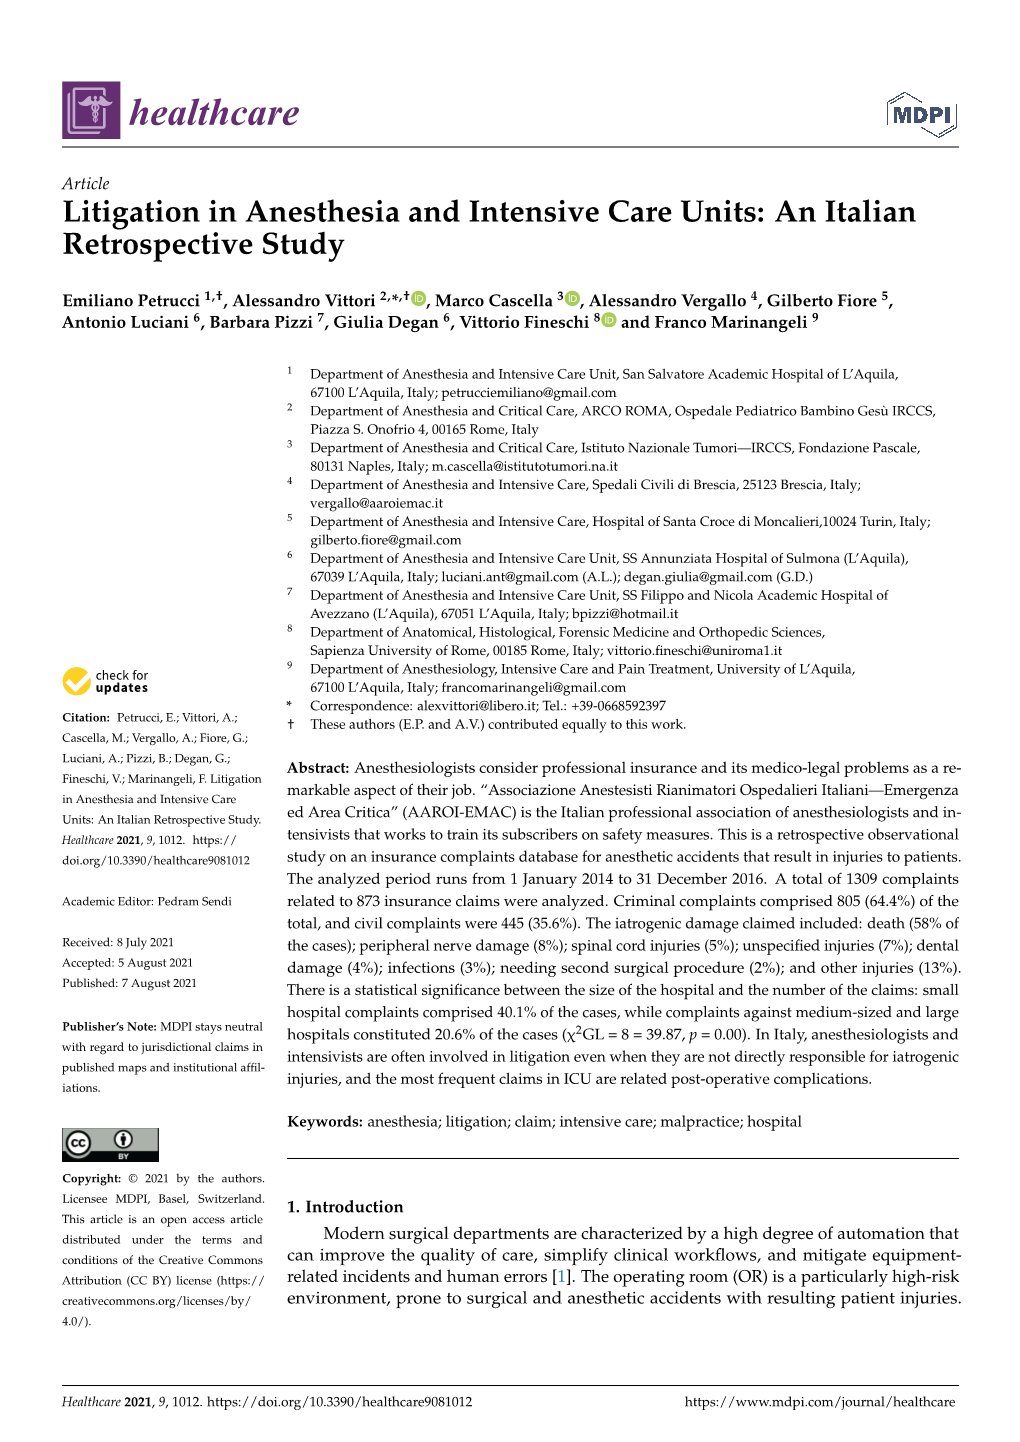 Litigation in Anesthesia and Intensive Care Units: an Italian Retrospective Study